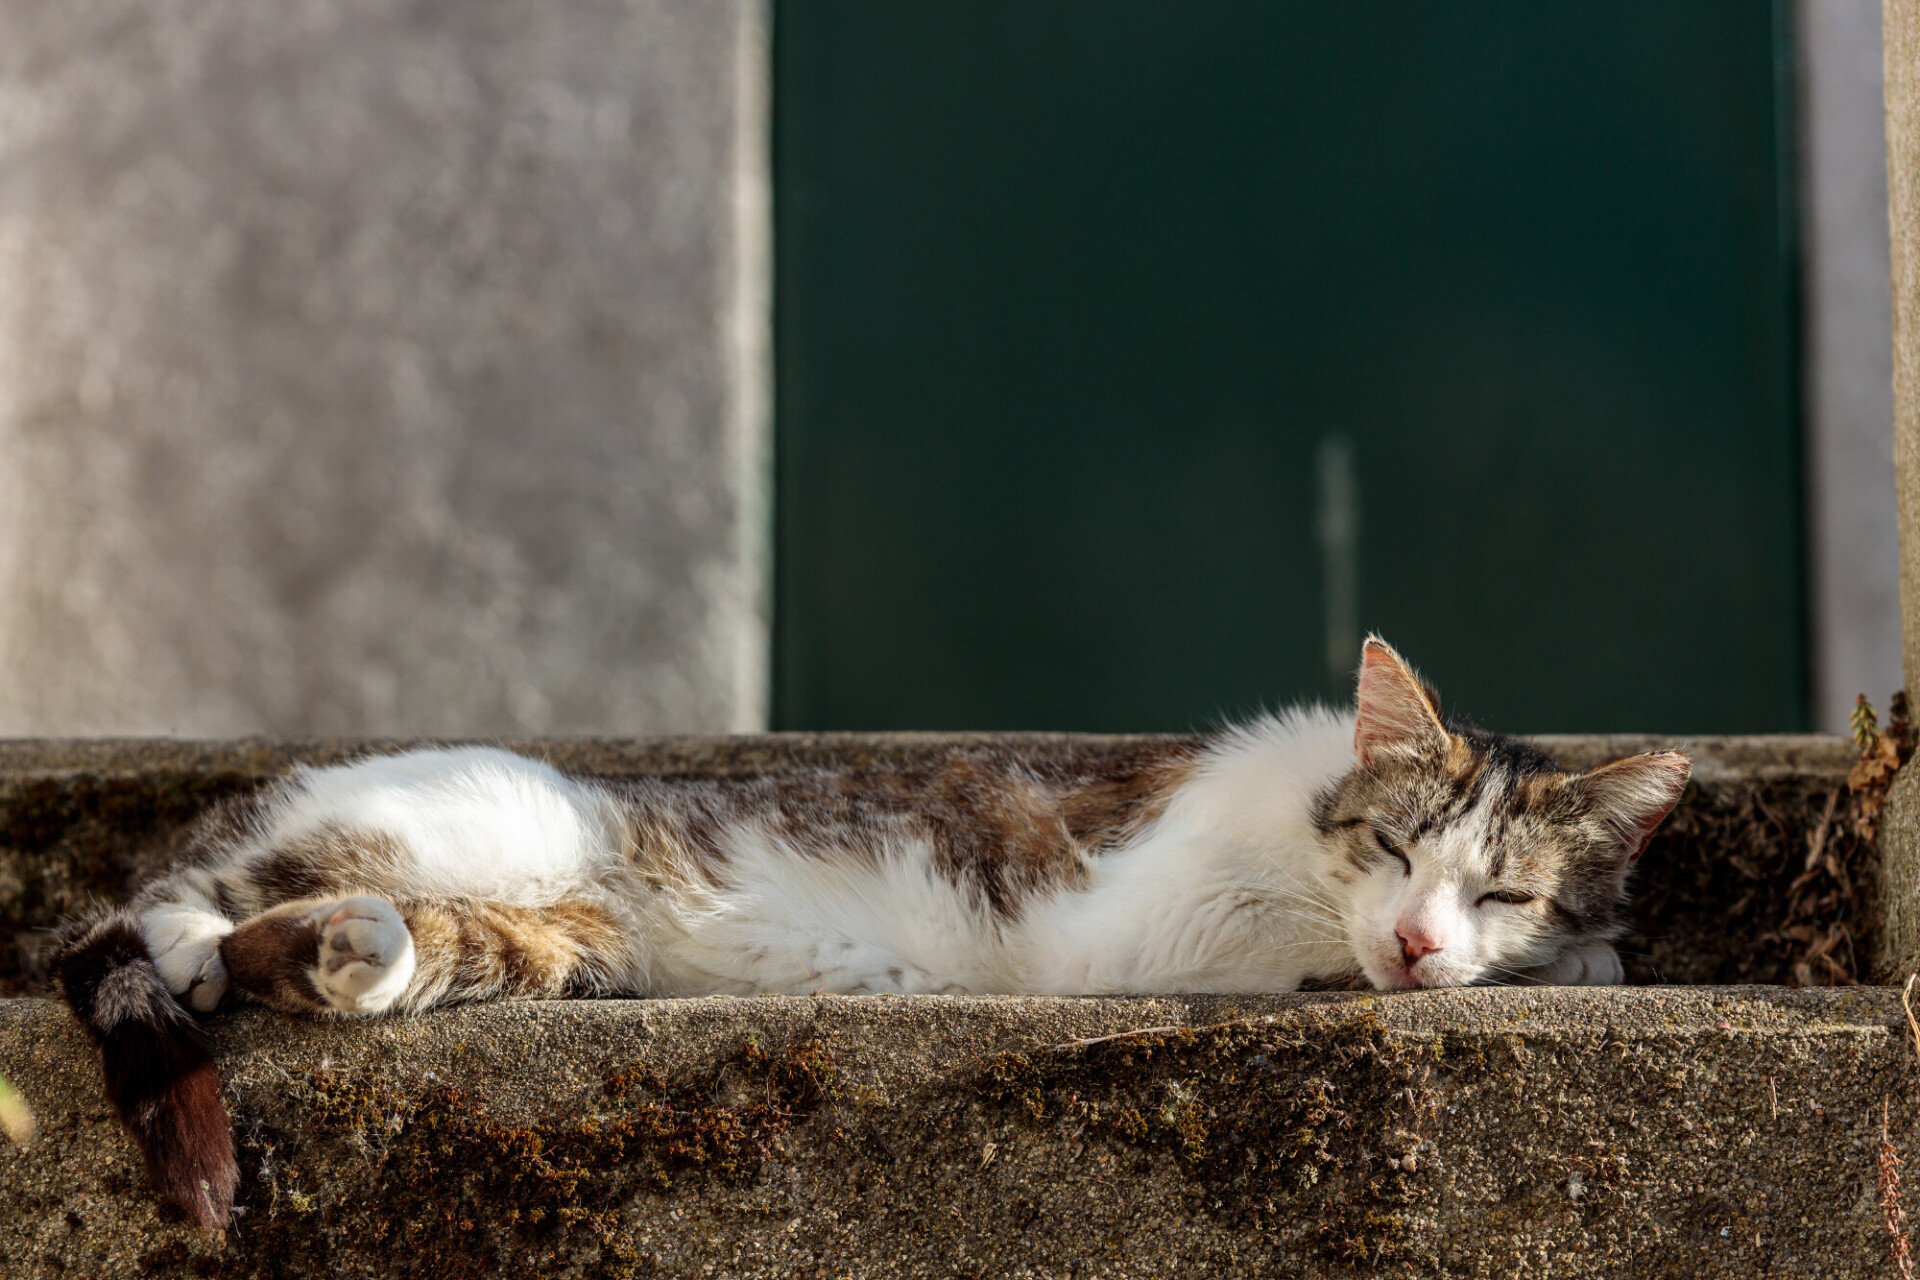 Street Serenity: Relaxed Cat Lounging on Staircase